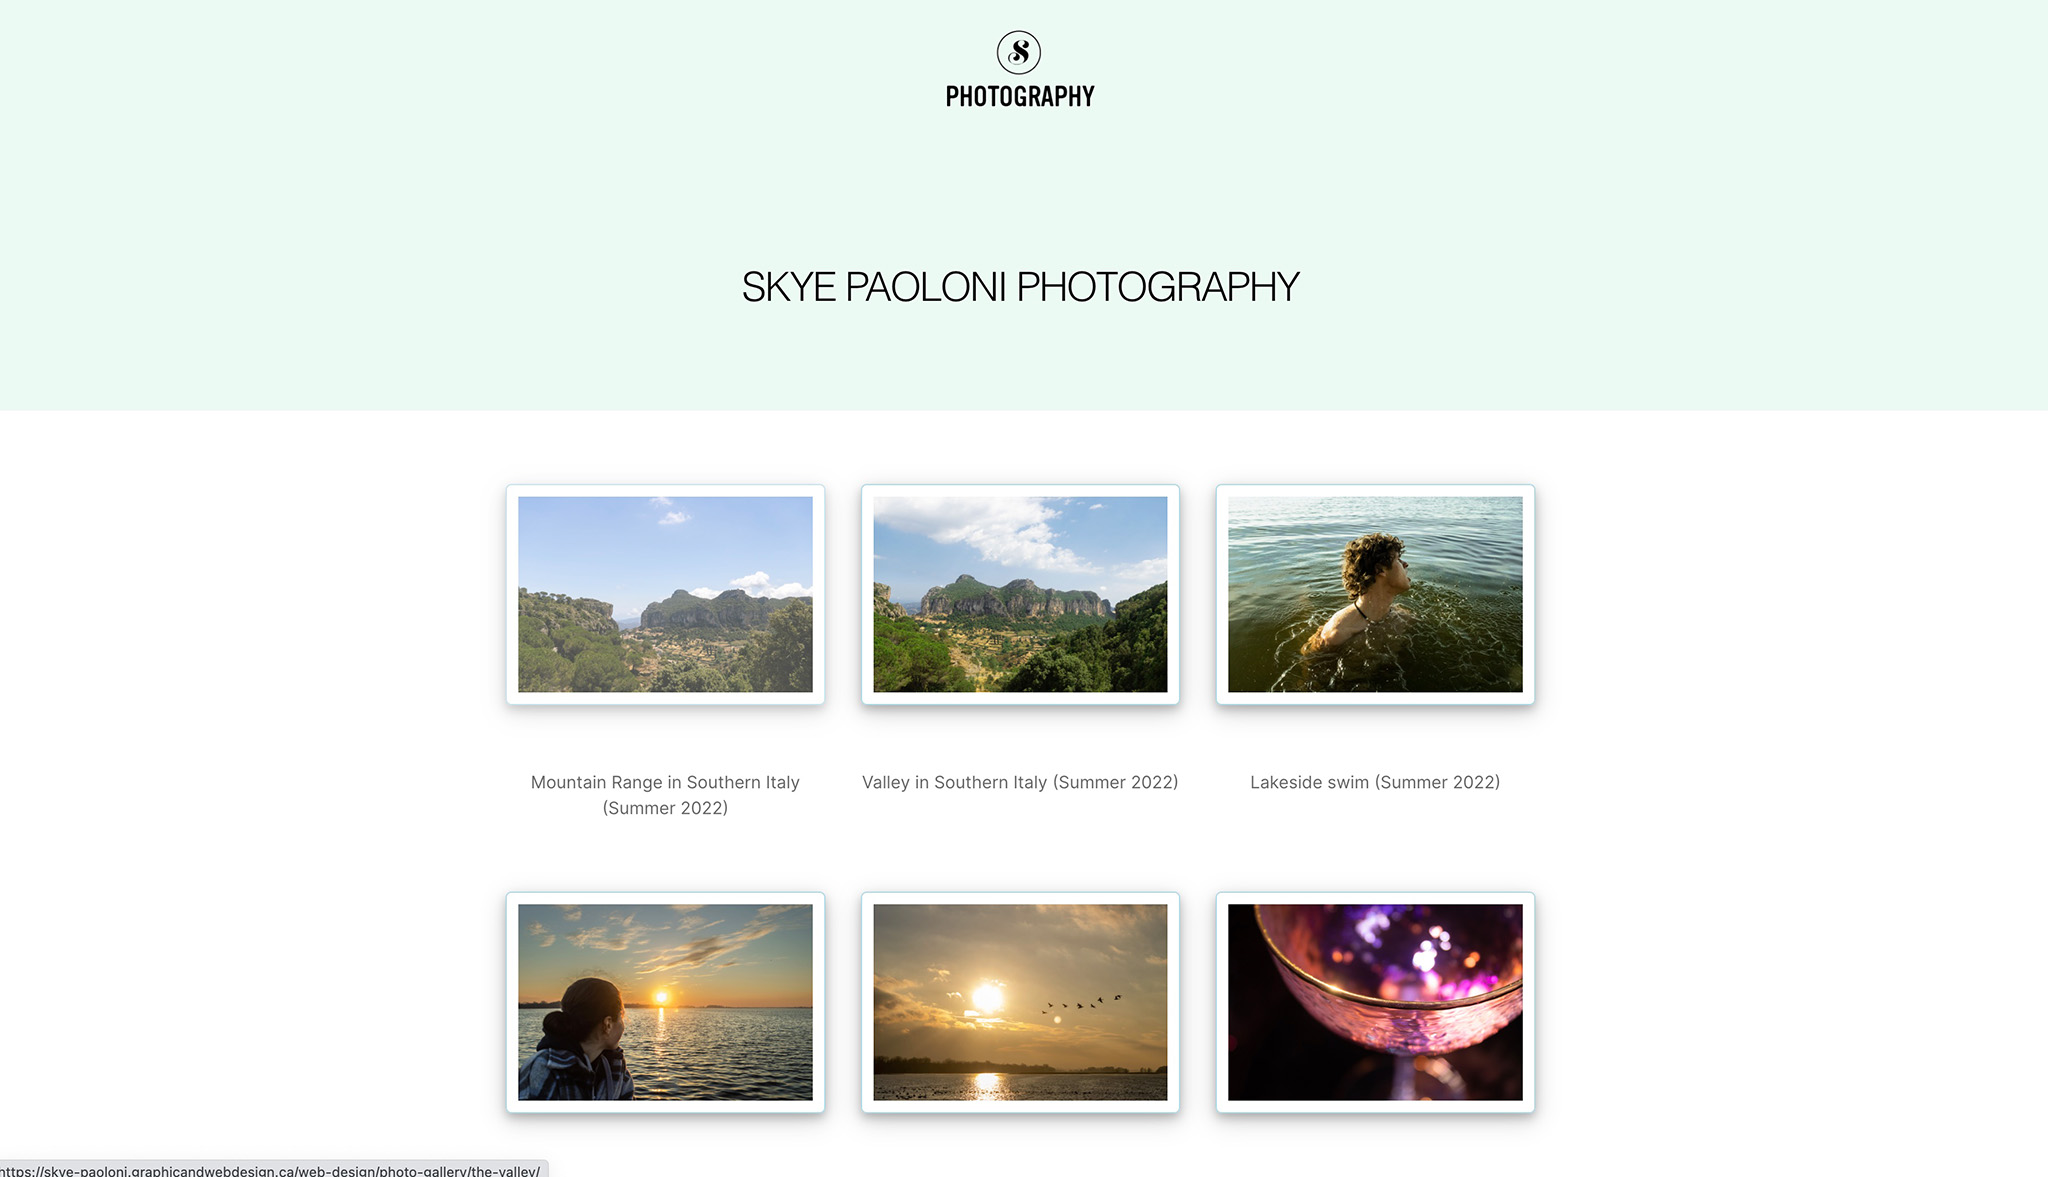 This is a screenshot of the landing page of an image gallery website created for web design in association with photography classes.